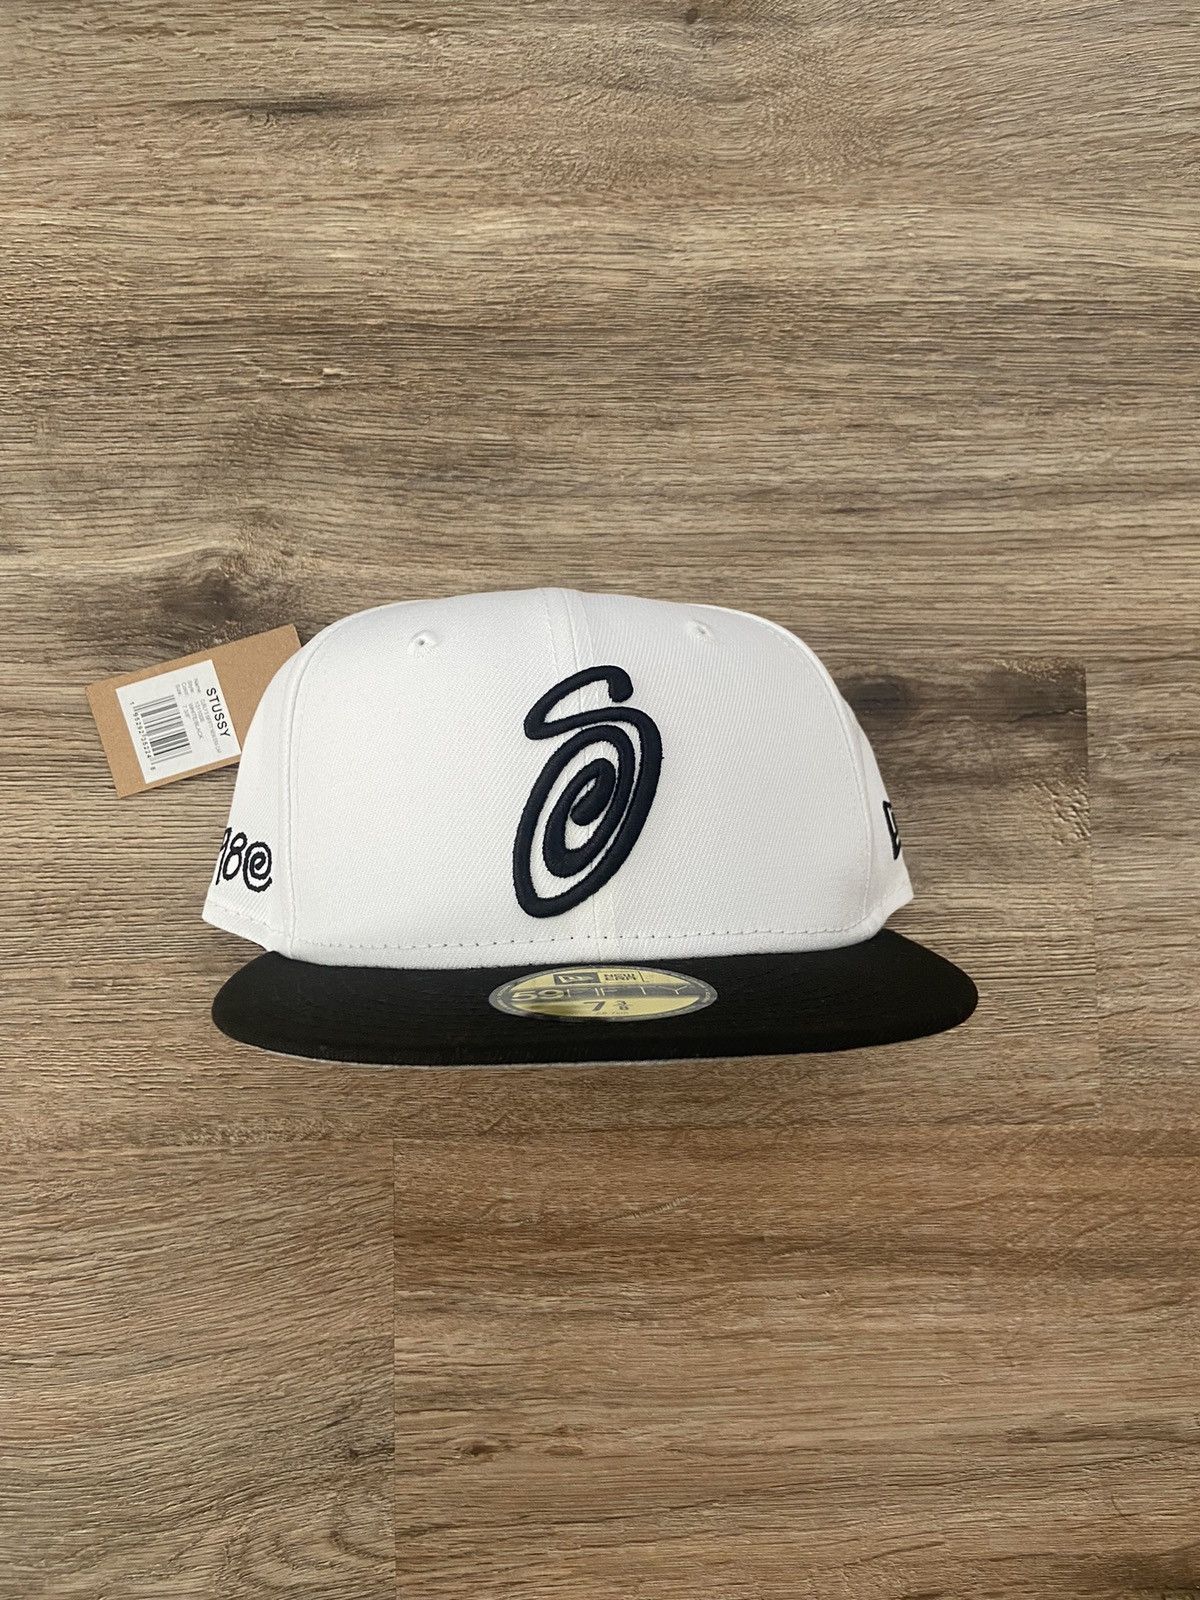 Stussy Stussy Curly S 59Fifty Cap 7 3/8 | Grailed